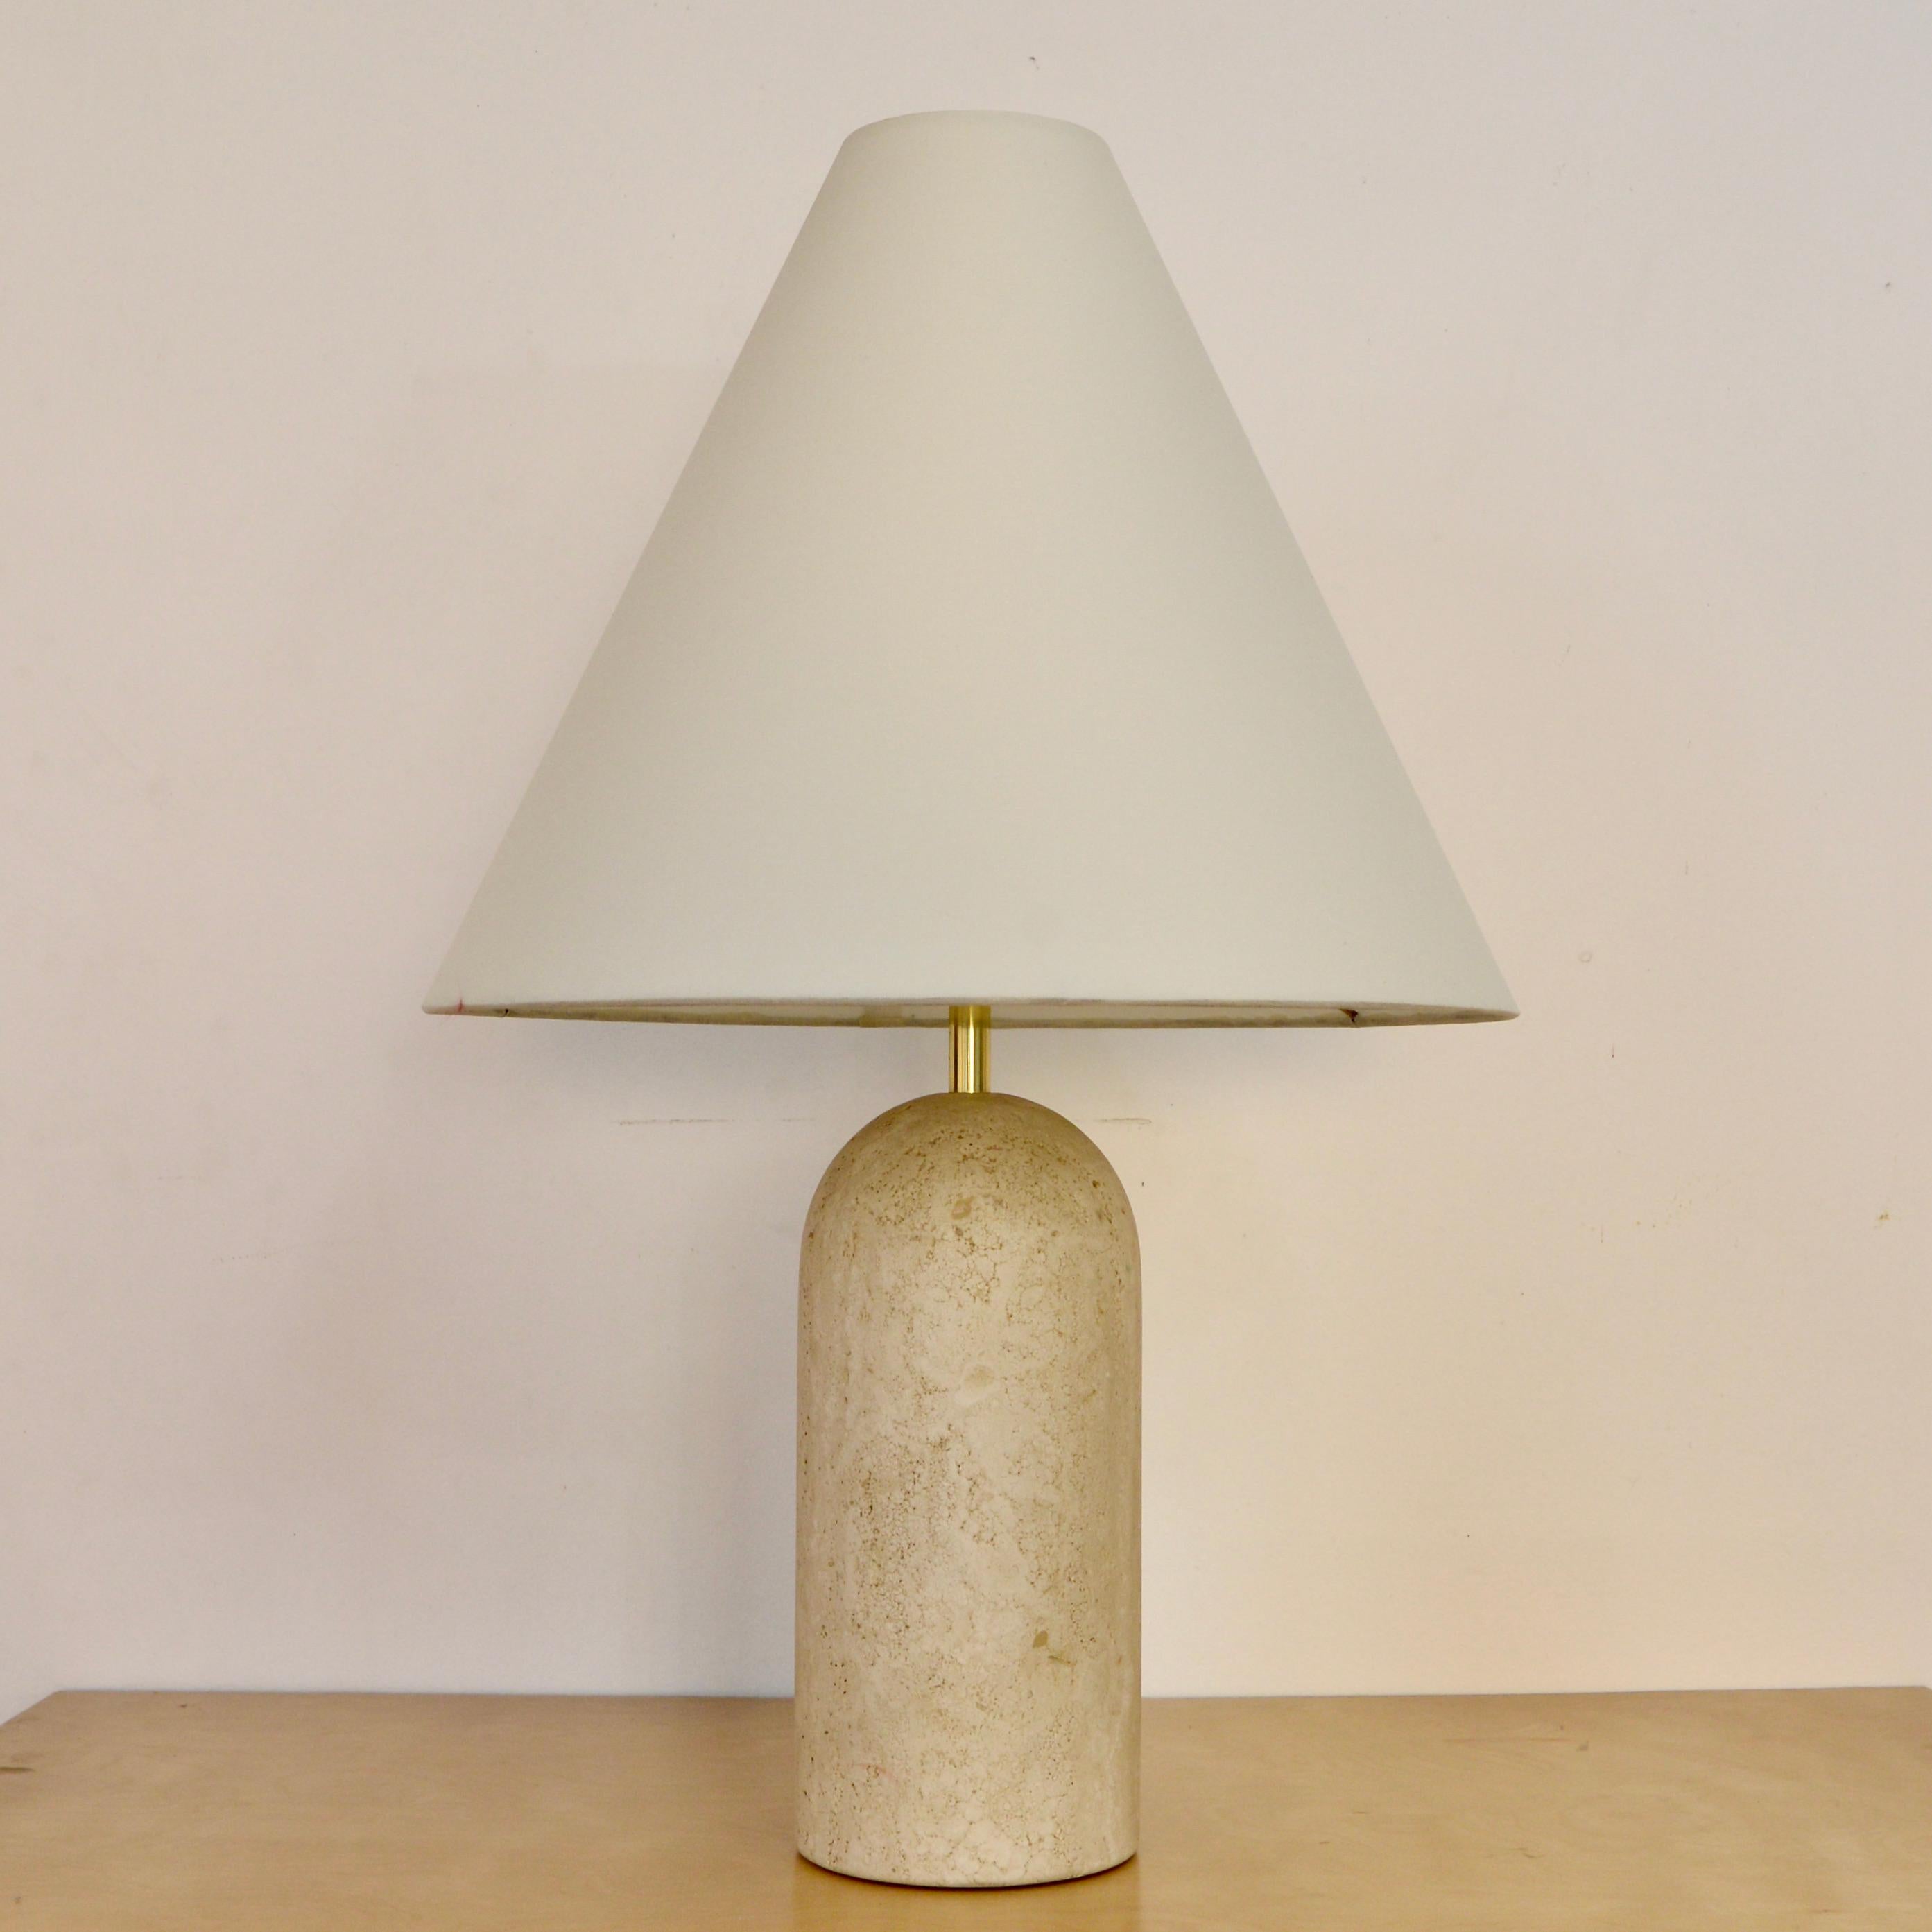 Vintage French carved rounded travertine table lamp from the 1950s. Fully rewired with a single E26 medium based socket, ready to be used in the USA. 
Measurements:
Height: 25.5”
Shade diameter: 16”
Base diametre: 5”.